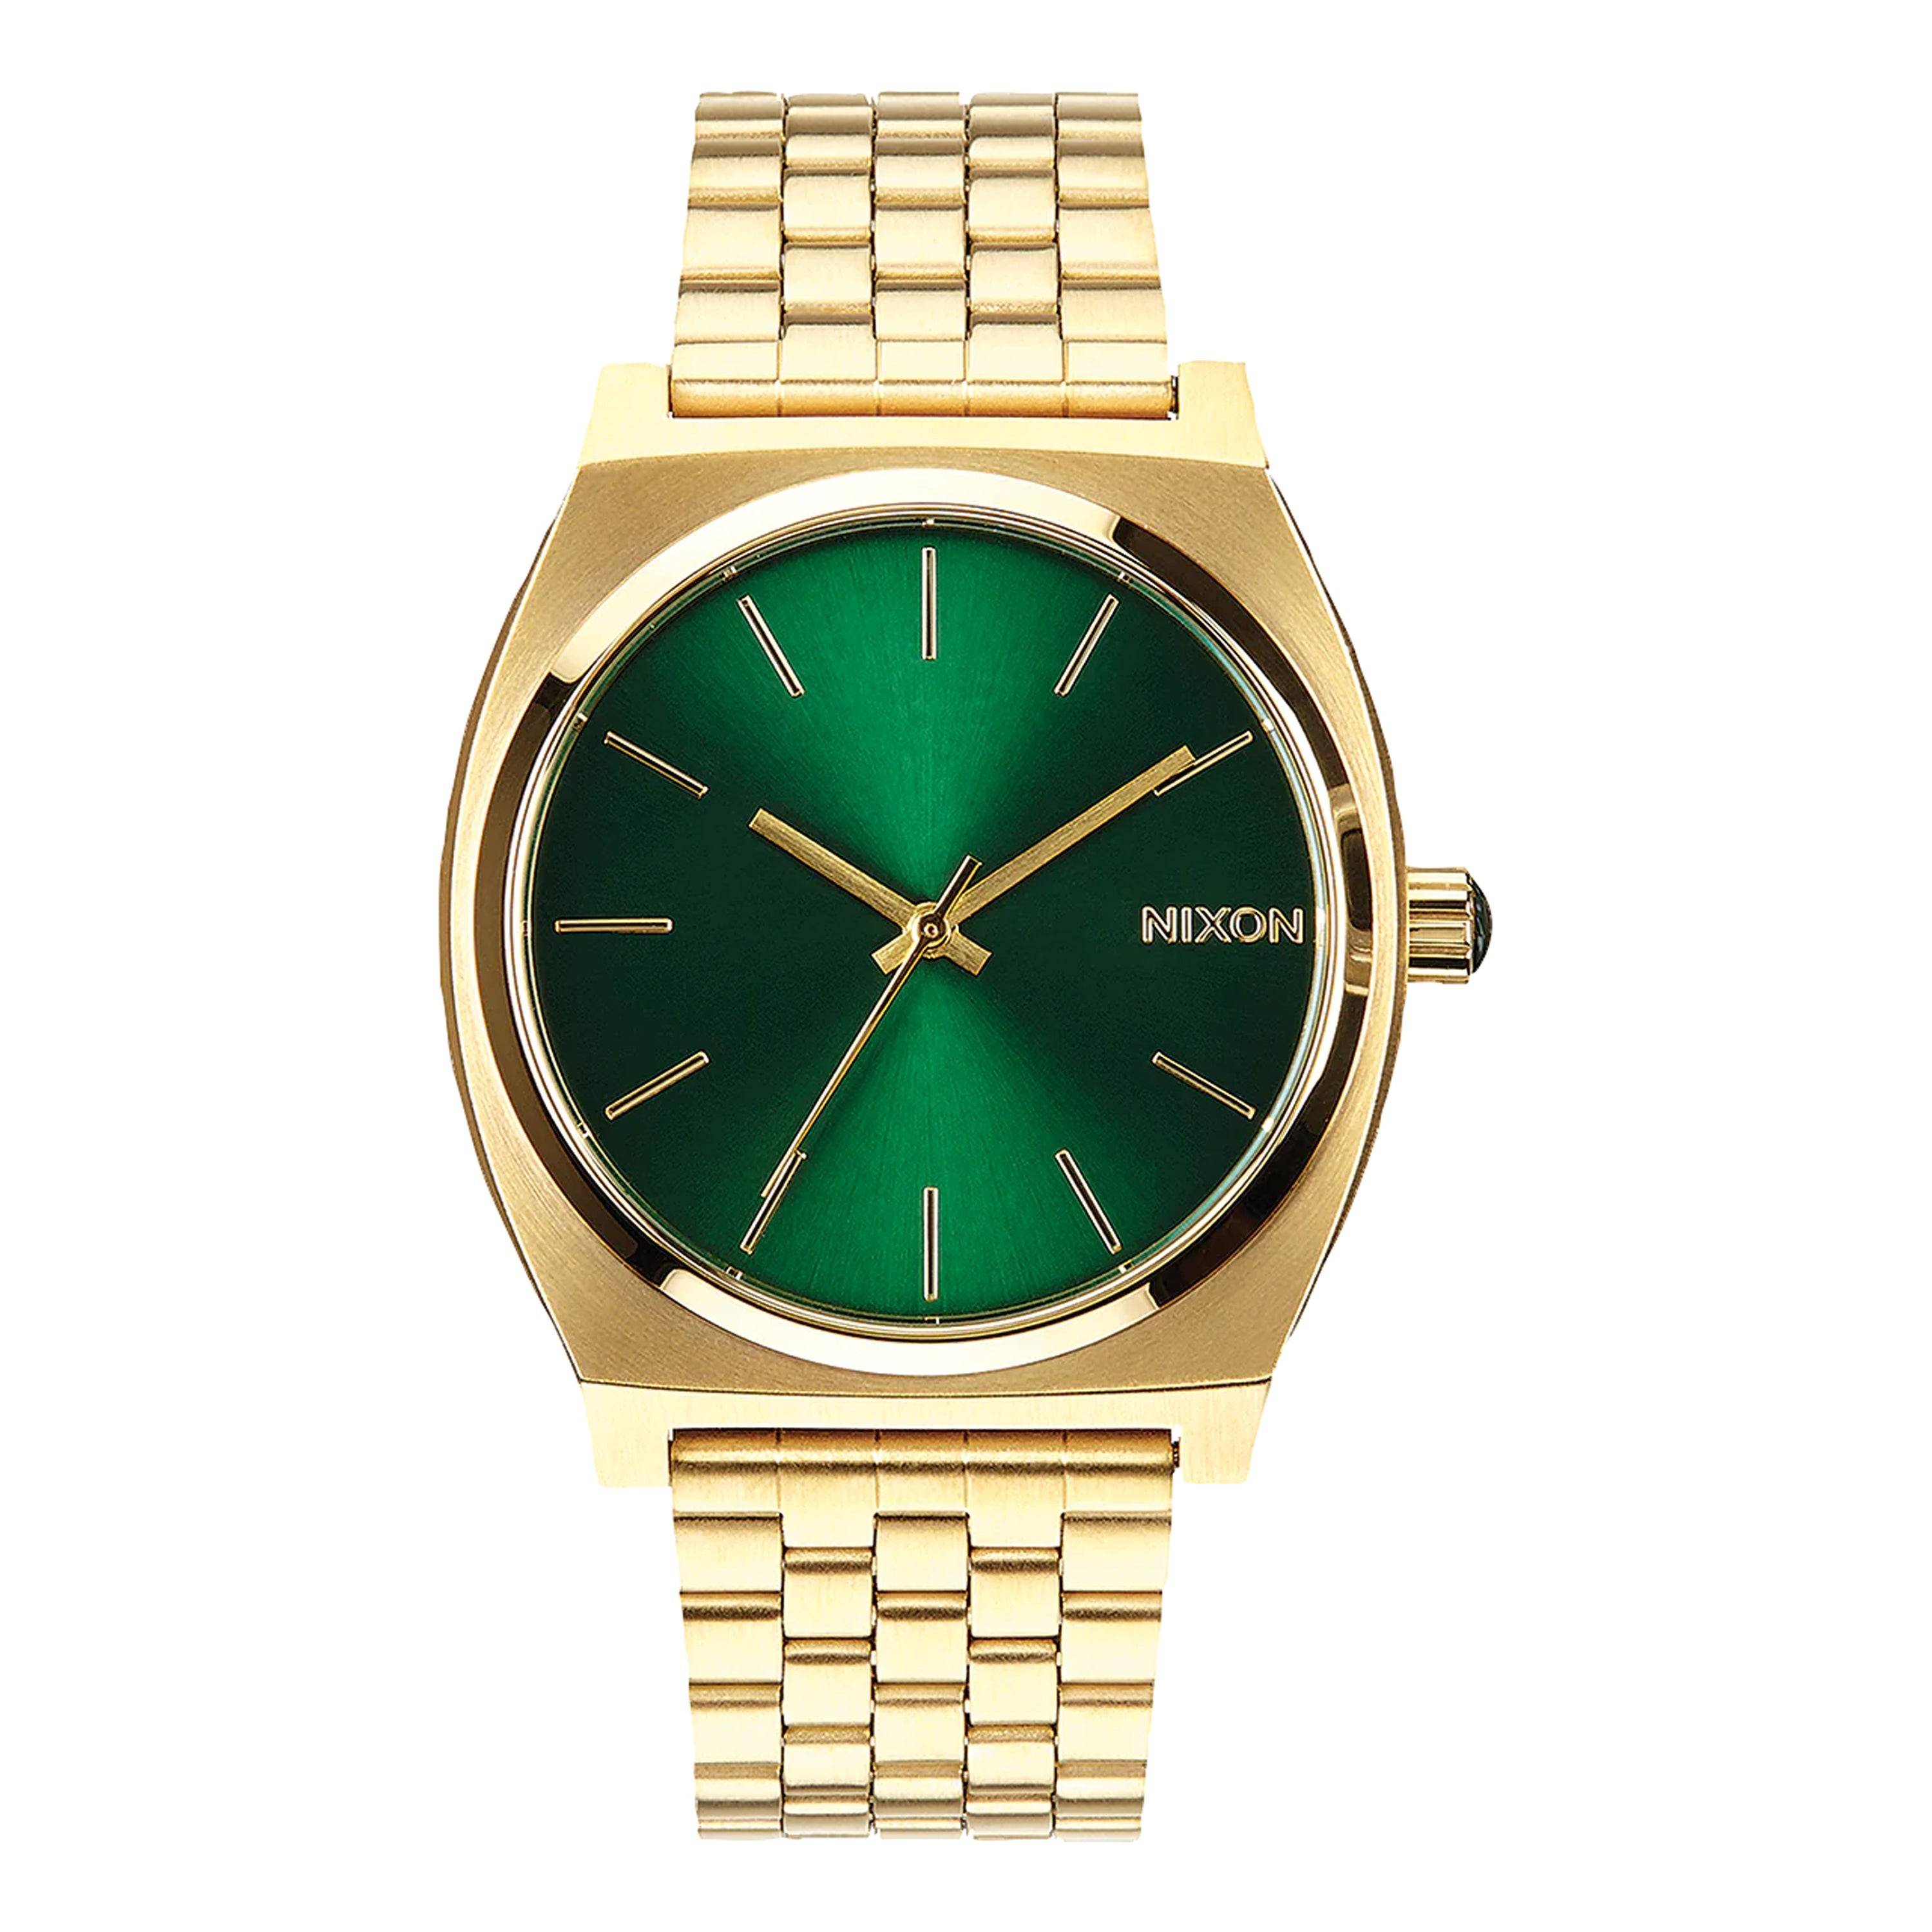 Men's Time Teller Gold-Tone Stainless Steel Watch, Green Dial